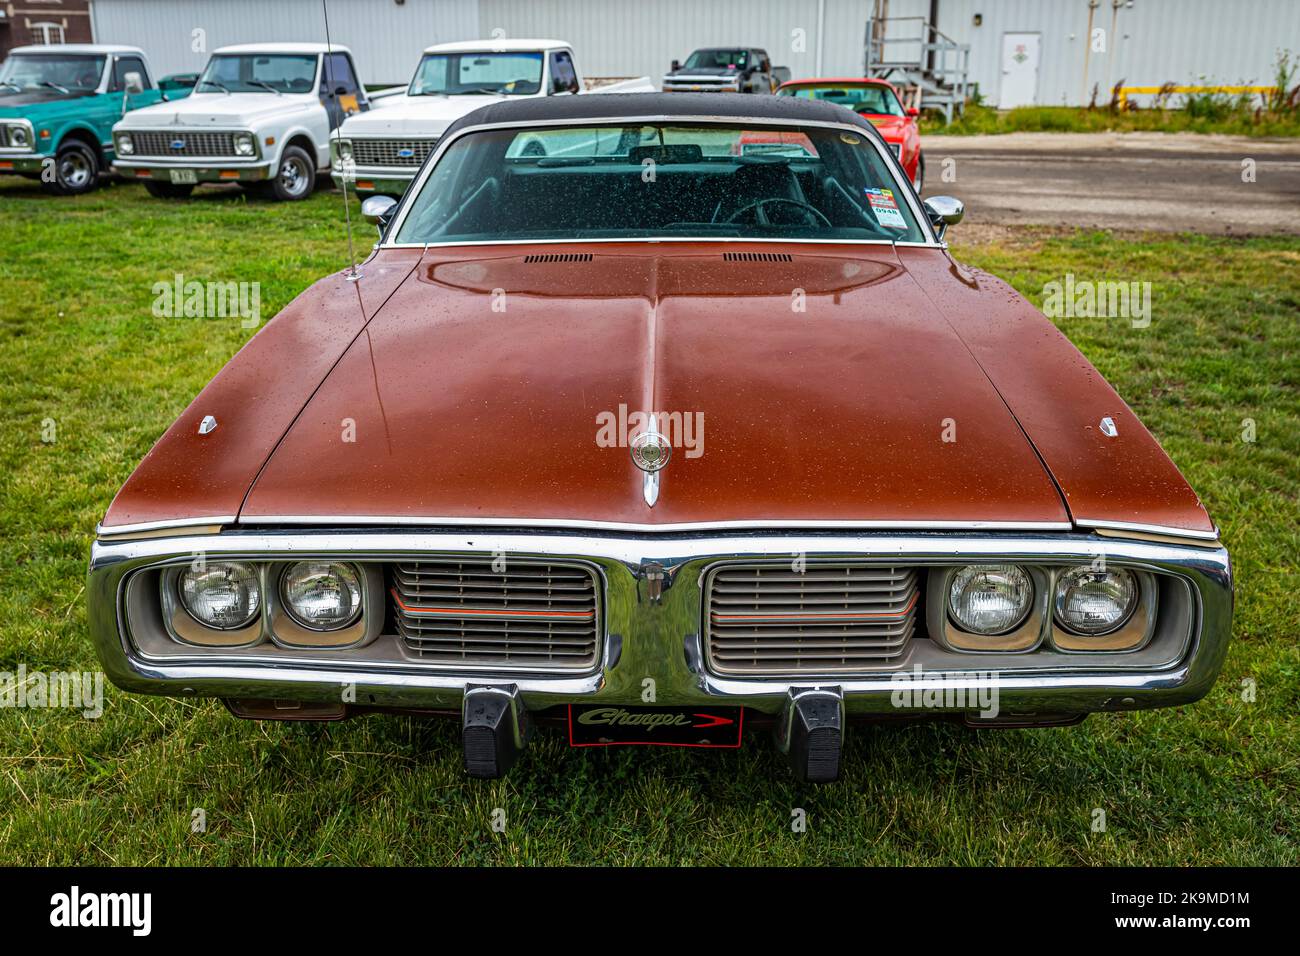 Des Moines, IA - July 01, 2022: High perspective front view of a 1973 Dodge Charger Hardtop Coupe at a local car show. Stock Photo